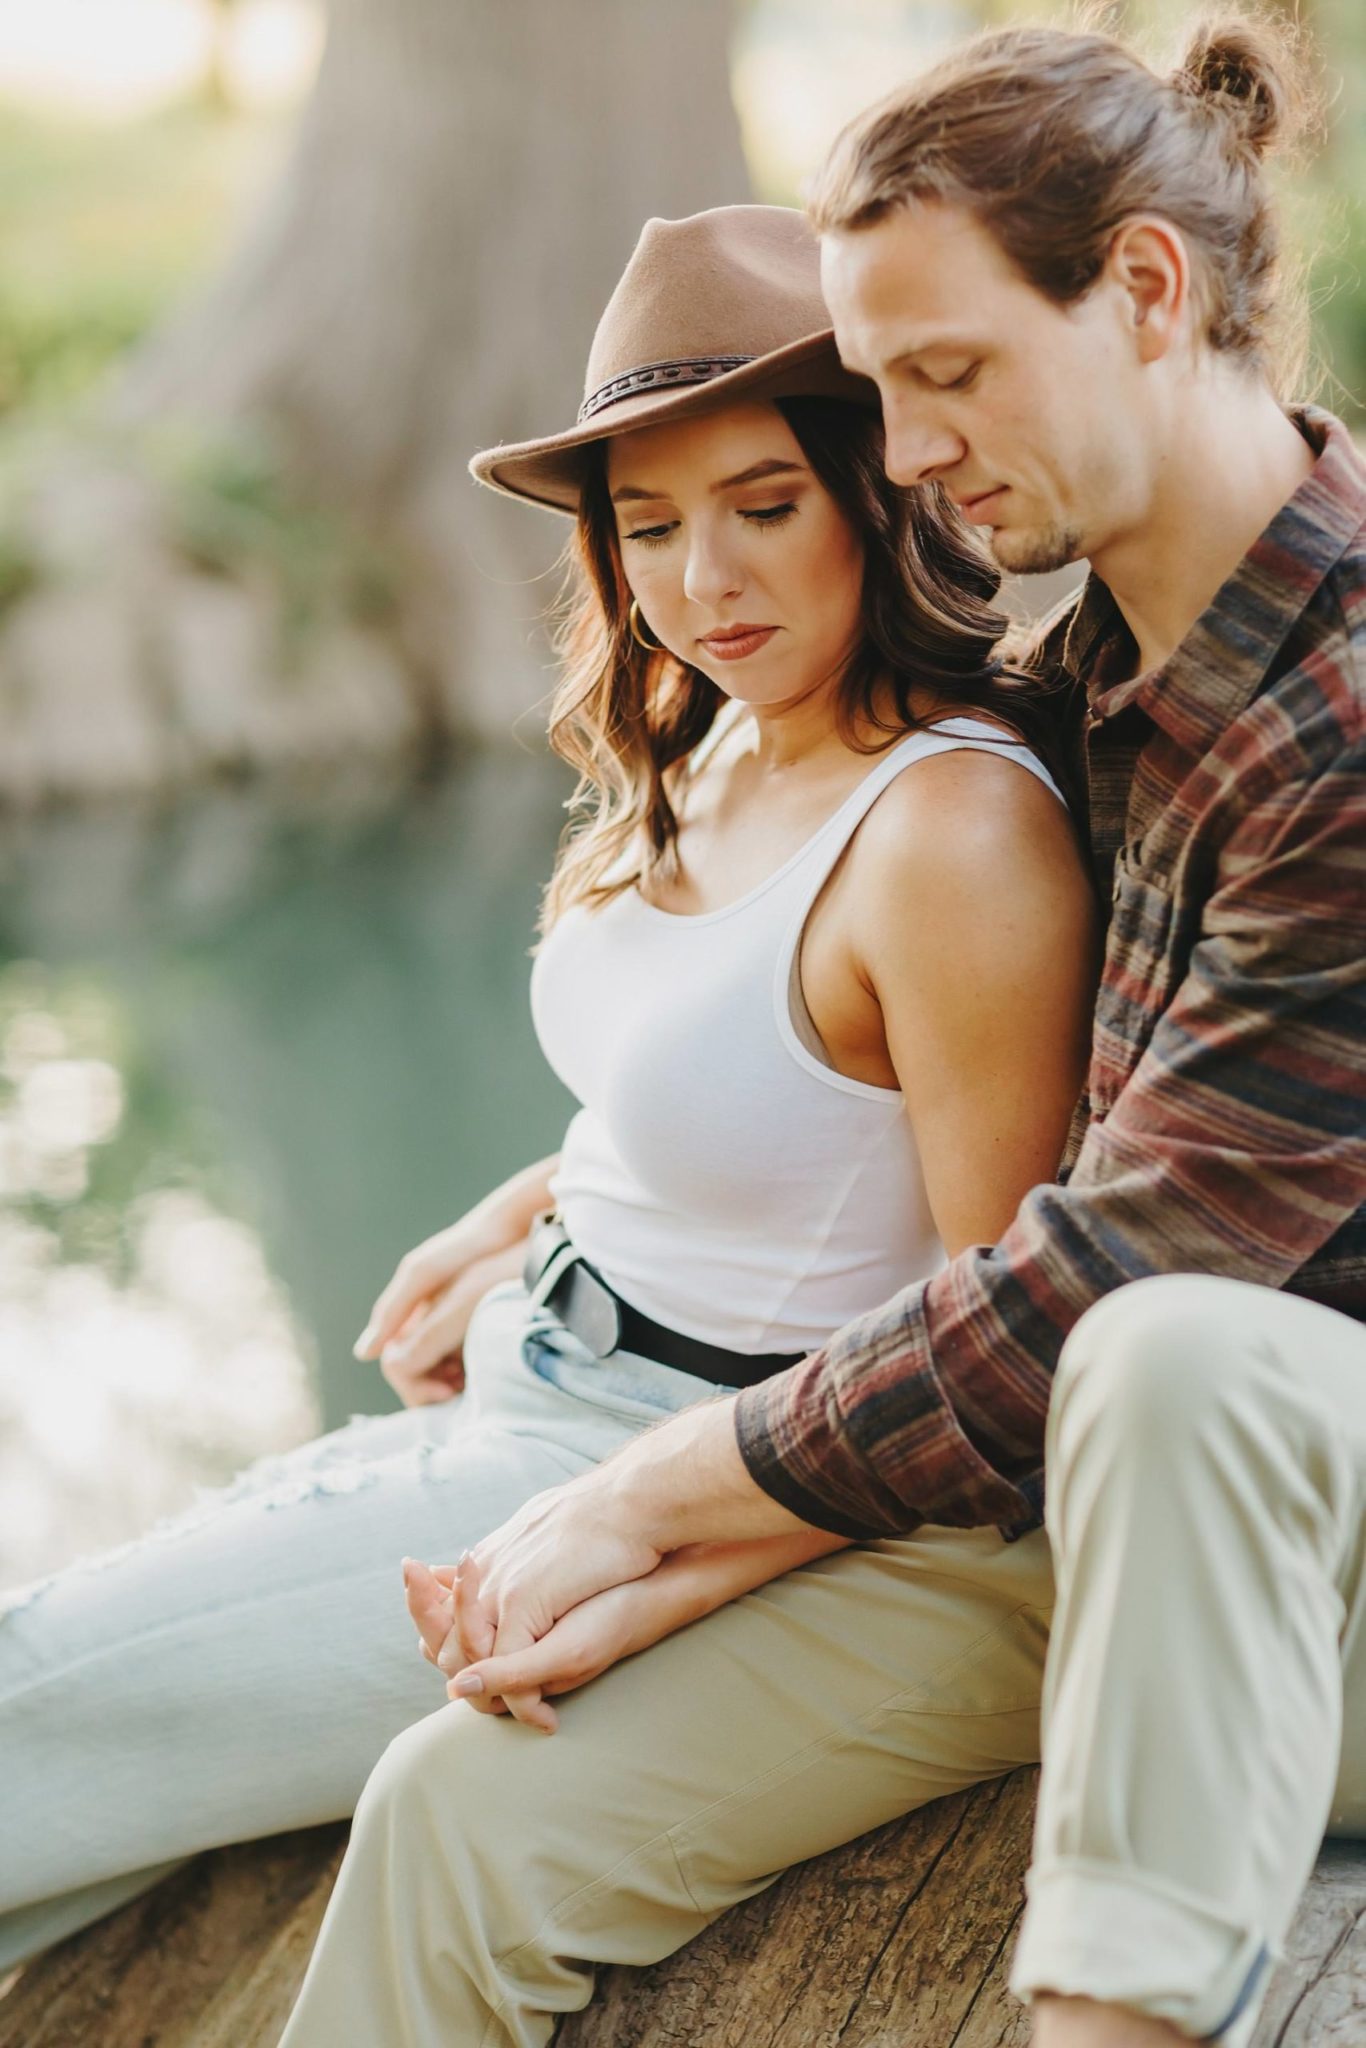 Austin Hill Country Engagement Photographers